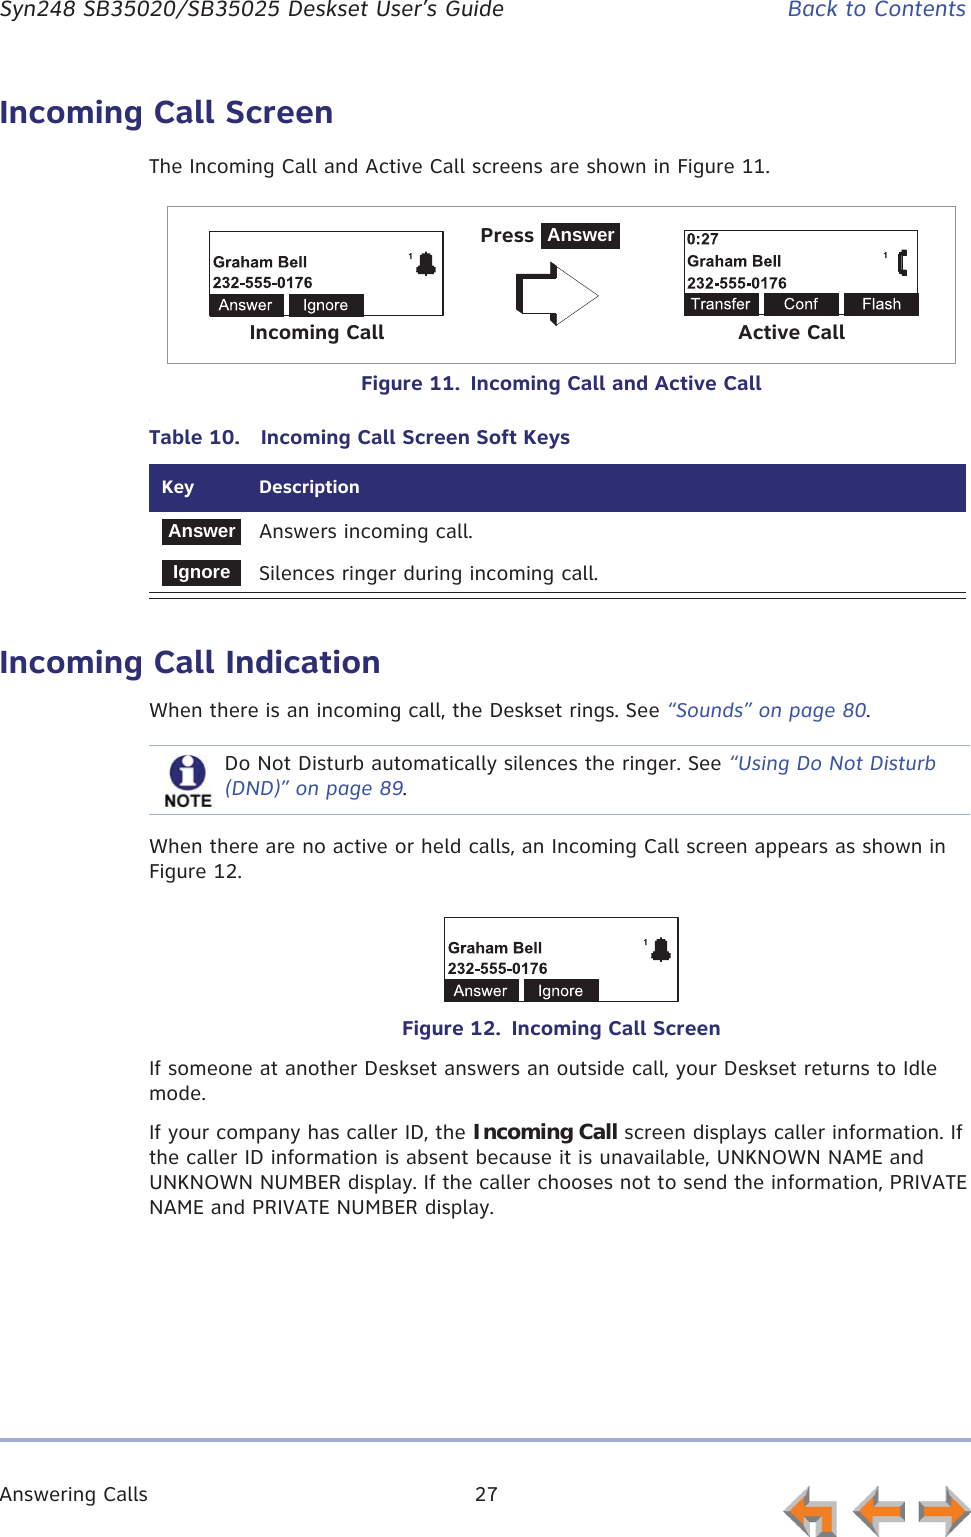 Answering Calls 27      Syn248 SB35020/SB35025 Deskset User’s Guide Back to ContentsIncoming Call ScreenThe Incoming Call and Active Call screens are shown in Figure 11.Figure 11.  Incoming Call and Active Call.Incoming Call IndicationWhen there is an incoming call, the Deskset rings. See “Sounds” on page 80.When there are no active or held calls, an Incoming Call screen appears as shown in Figure 12.Figure 12.  Incoming Call ScreenIf someone at another Deskset answers an outside call, your Deskset returns to Idle mode.If your company has caller ID, the Incoming Call screen displays caller information. If the caller ID information is absent because it is unavailable, UNKNOWN NAME and UNKNOWN NUMBER display. If the caller chooses not to send the information, PRIVATE NAME and PRIVATE NUMBER display.Table 10.  Incoming Call Screen Soft KeysKey  DescriptionAnswers incoming call.Silences ringer during incoming call.Press AnswerIncoming Call Active CallAnswerIgnoreDo Not Disturb automatically silences the ringer. See “Using Do Not Disturb (DND)” on page 89.